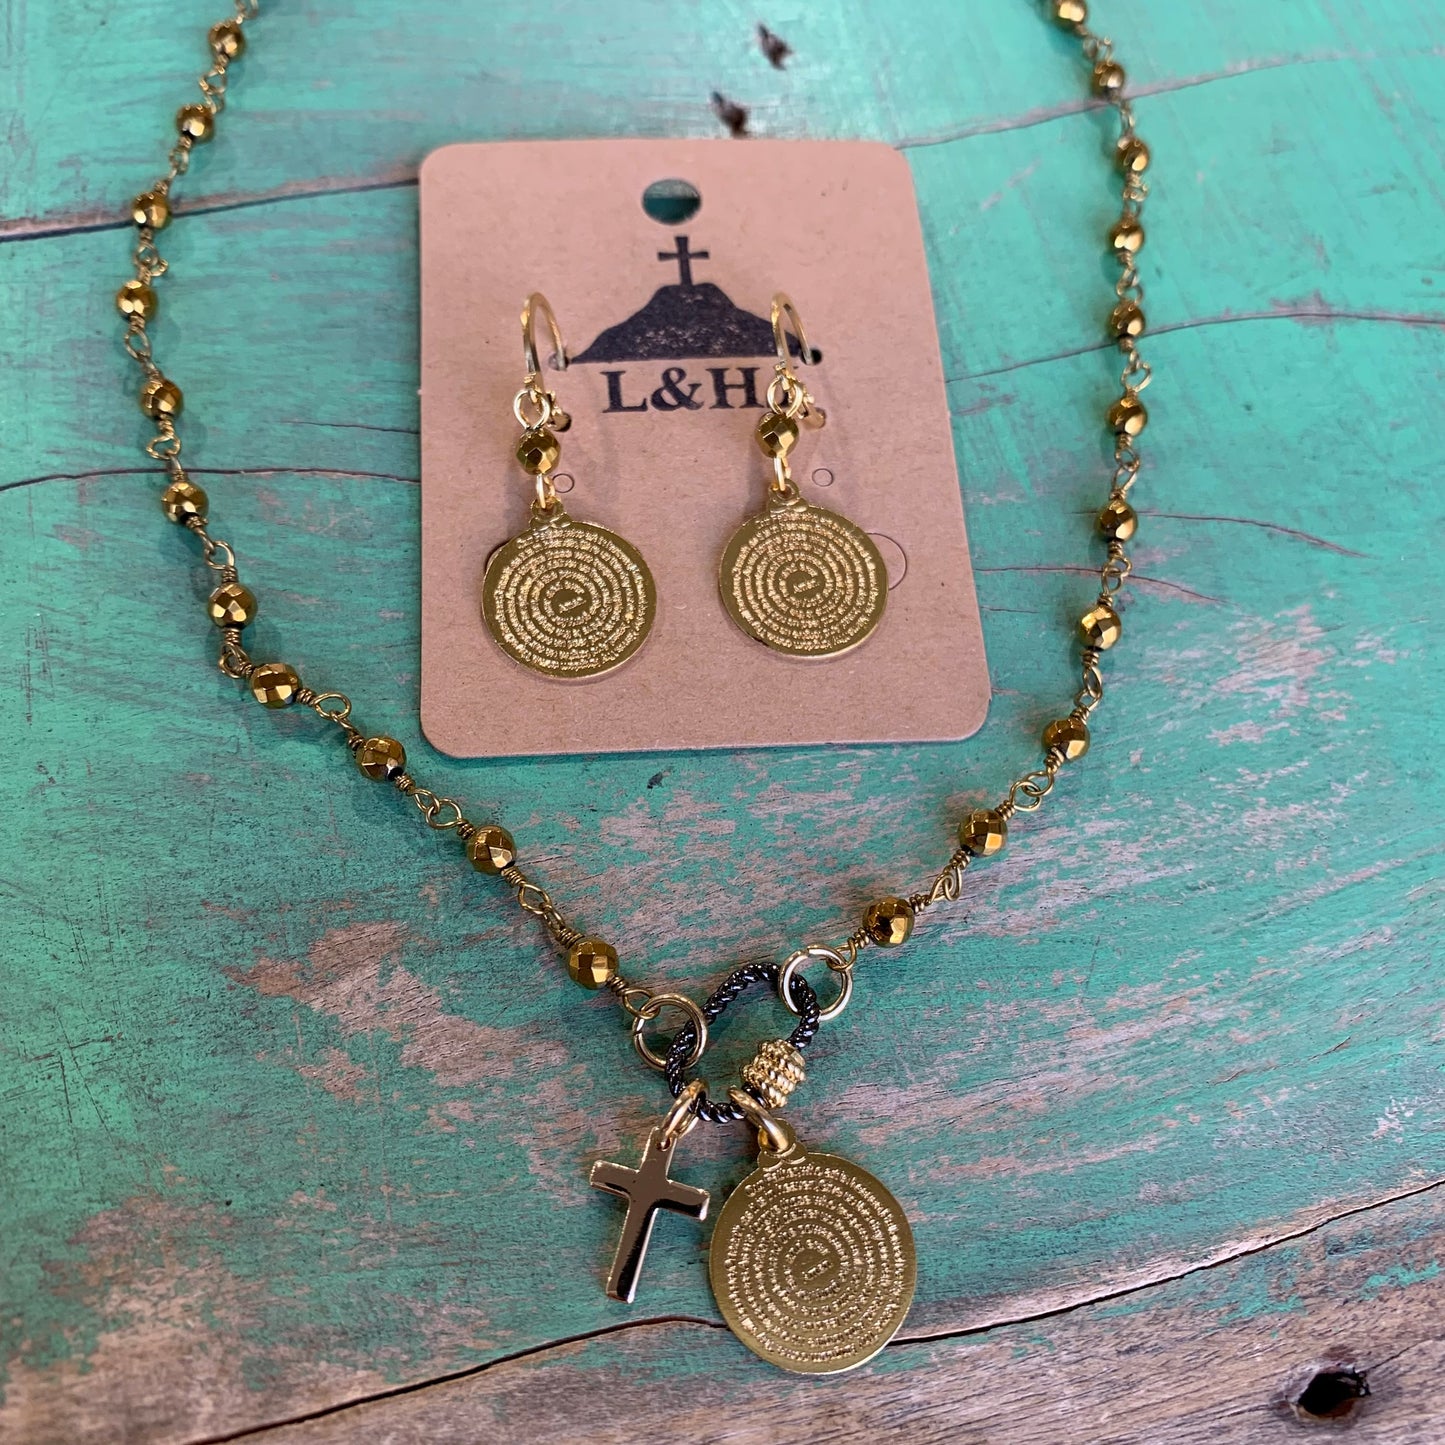 Our Father Prayer Necklace and Earrings